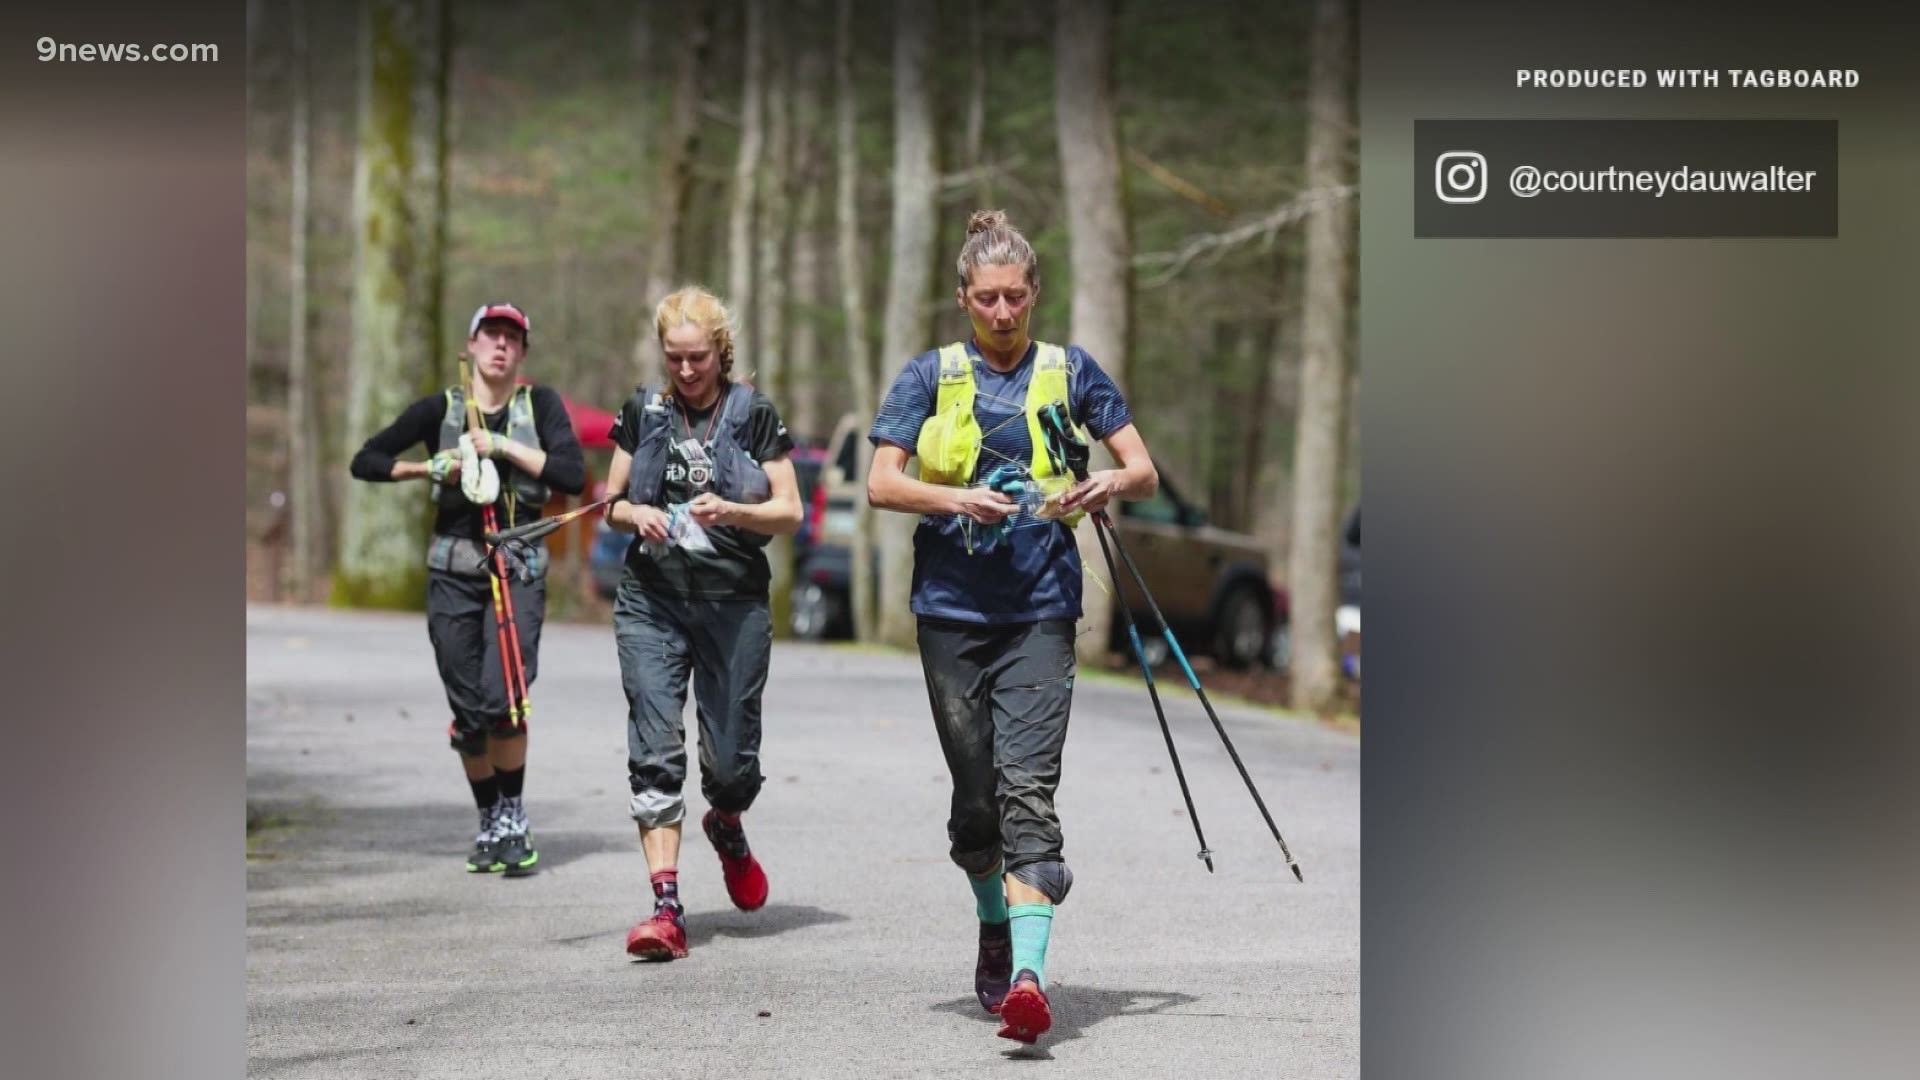 Courtney Dauwalter and Maggie Guterl finished two laps during the Barkley Marathons, which a Netflix documentary called "The Race that Eats its Young."